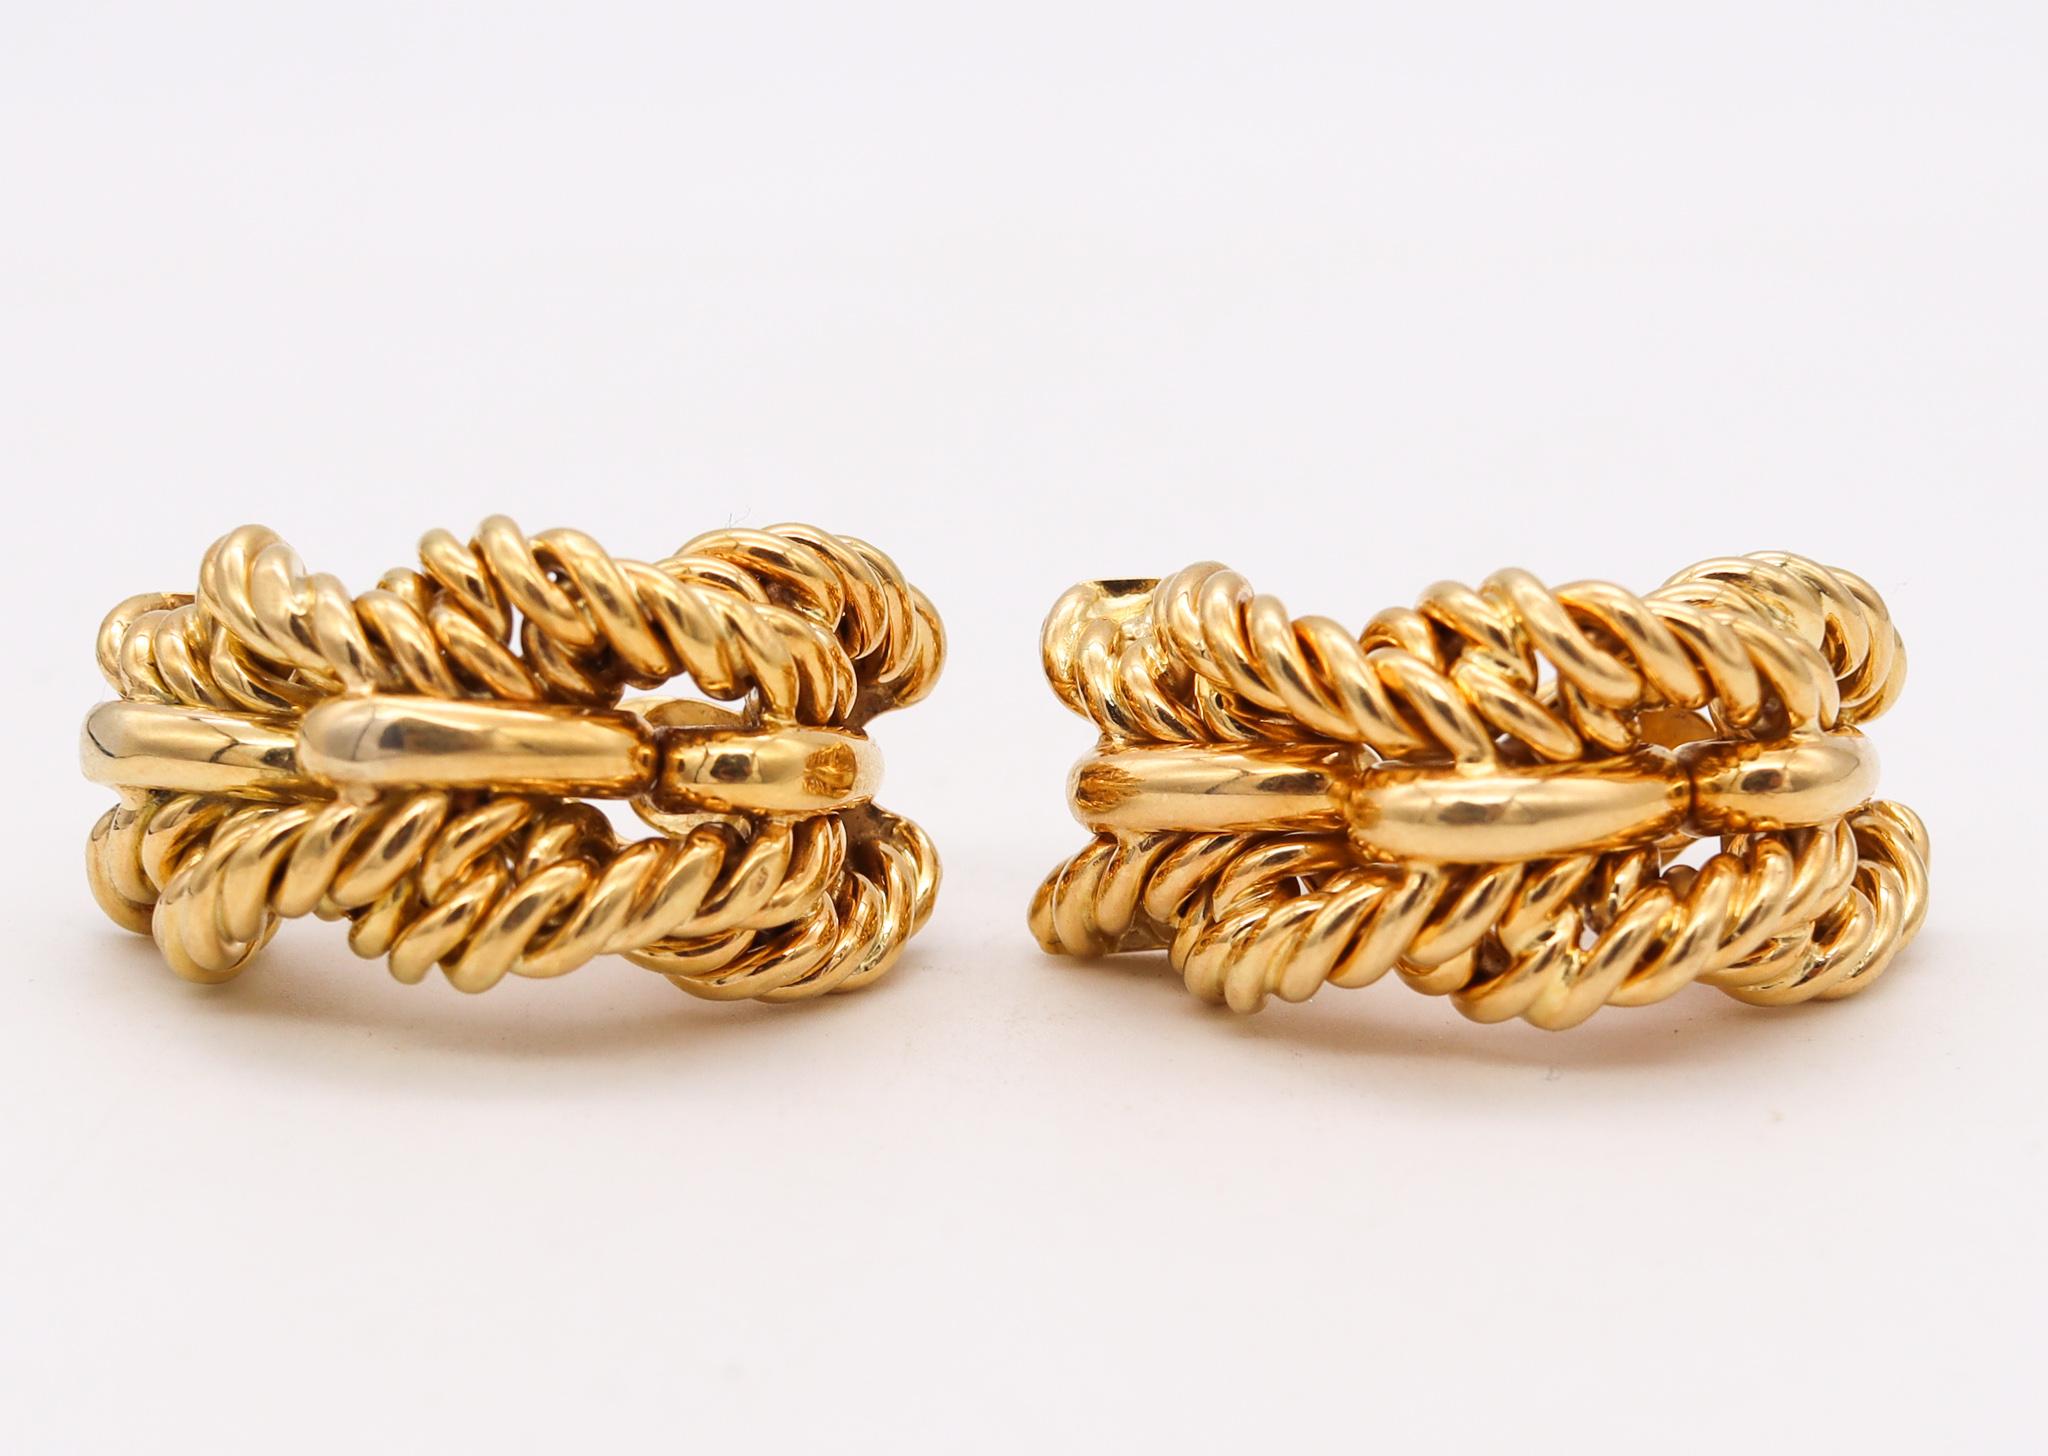 Tiffany & Co France 1970 Donald Claflin Rope Clips Earrings in 18Kt Yellow Gold 1